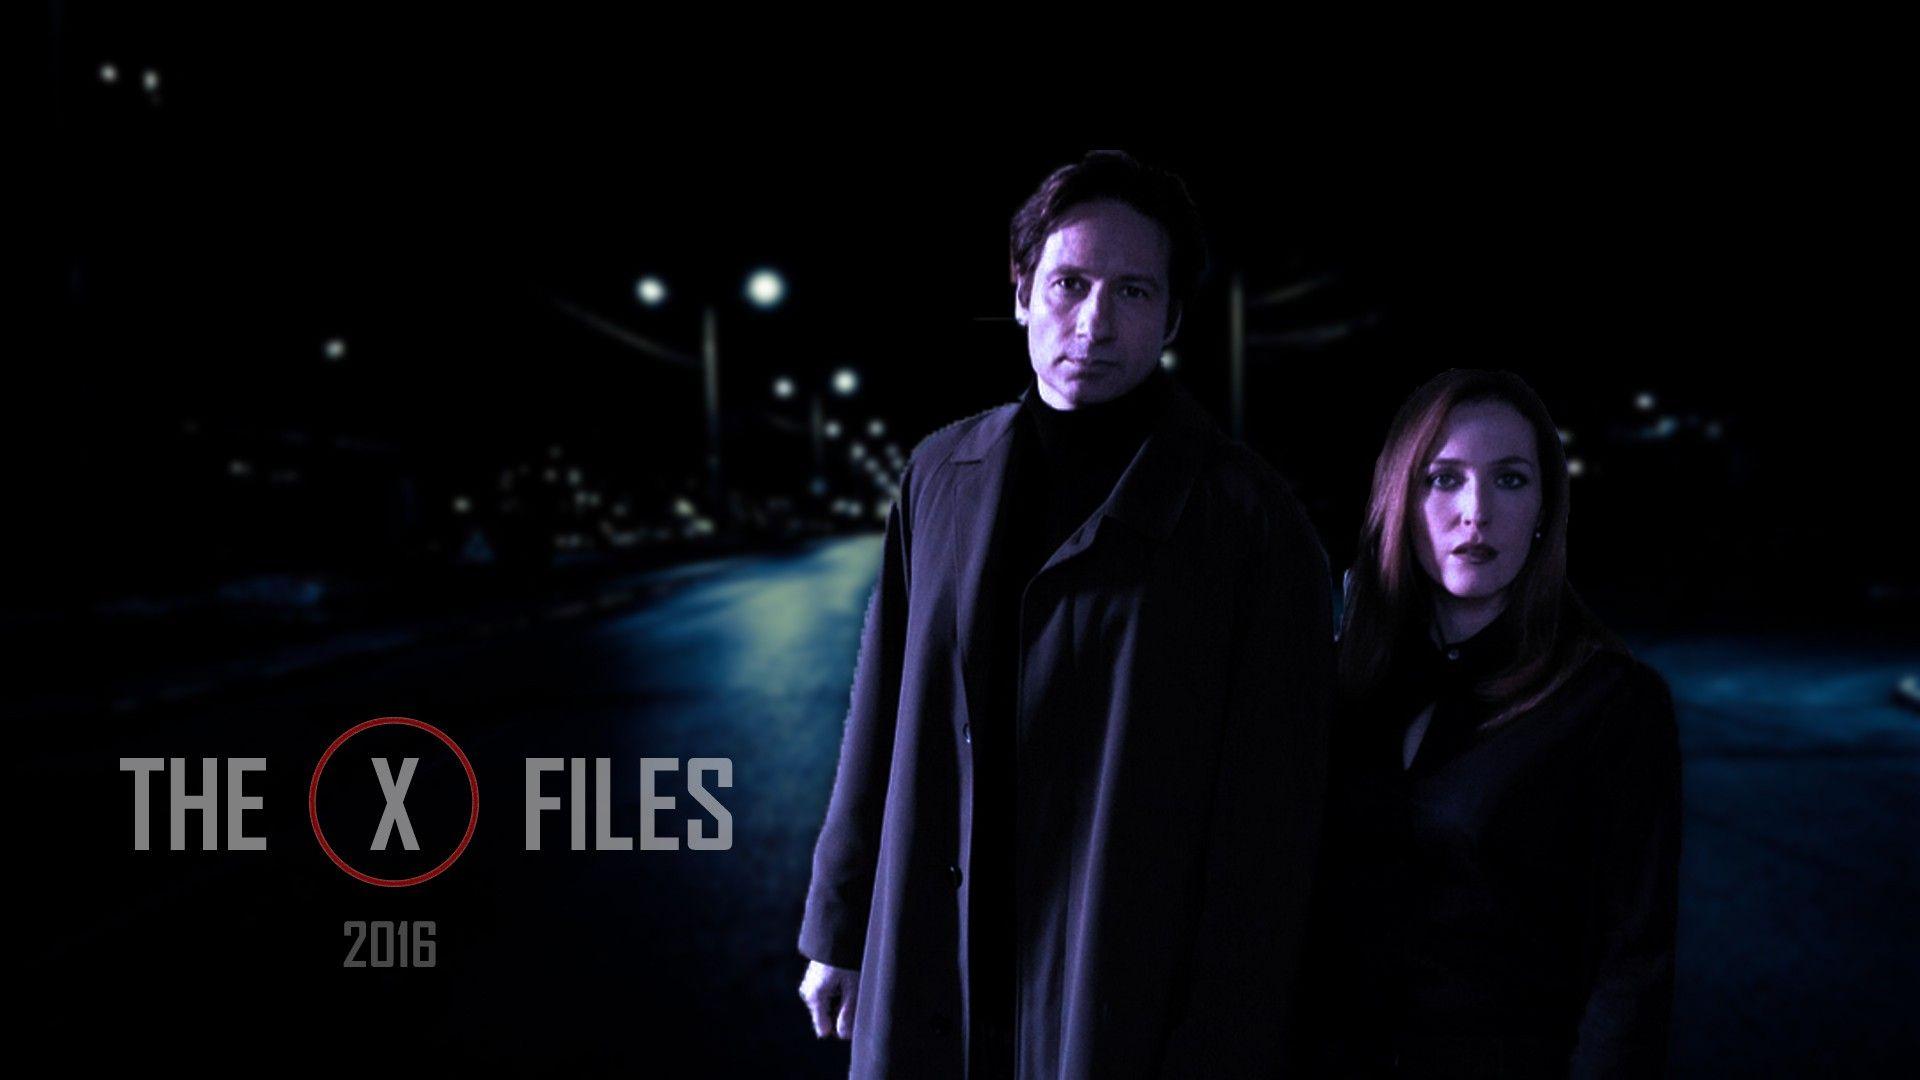 X Files wallpaperDownload free cool High Resolution background